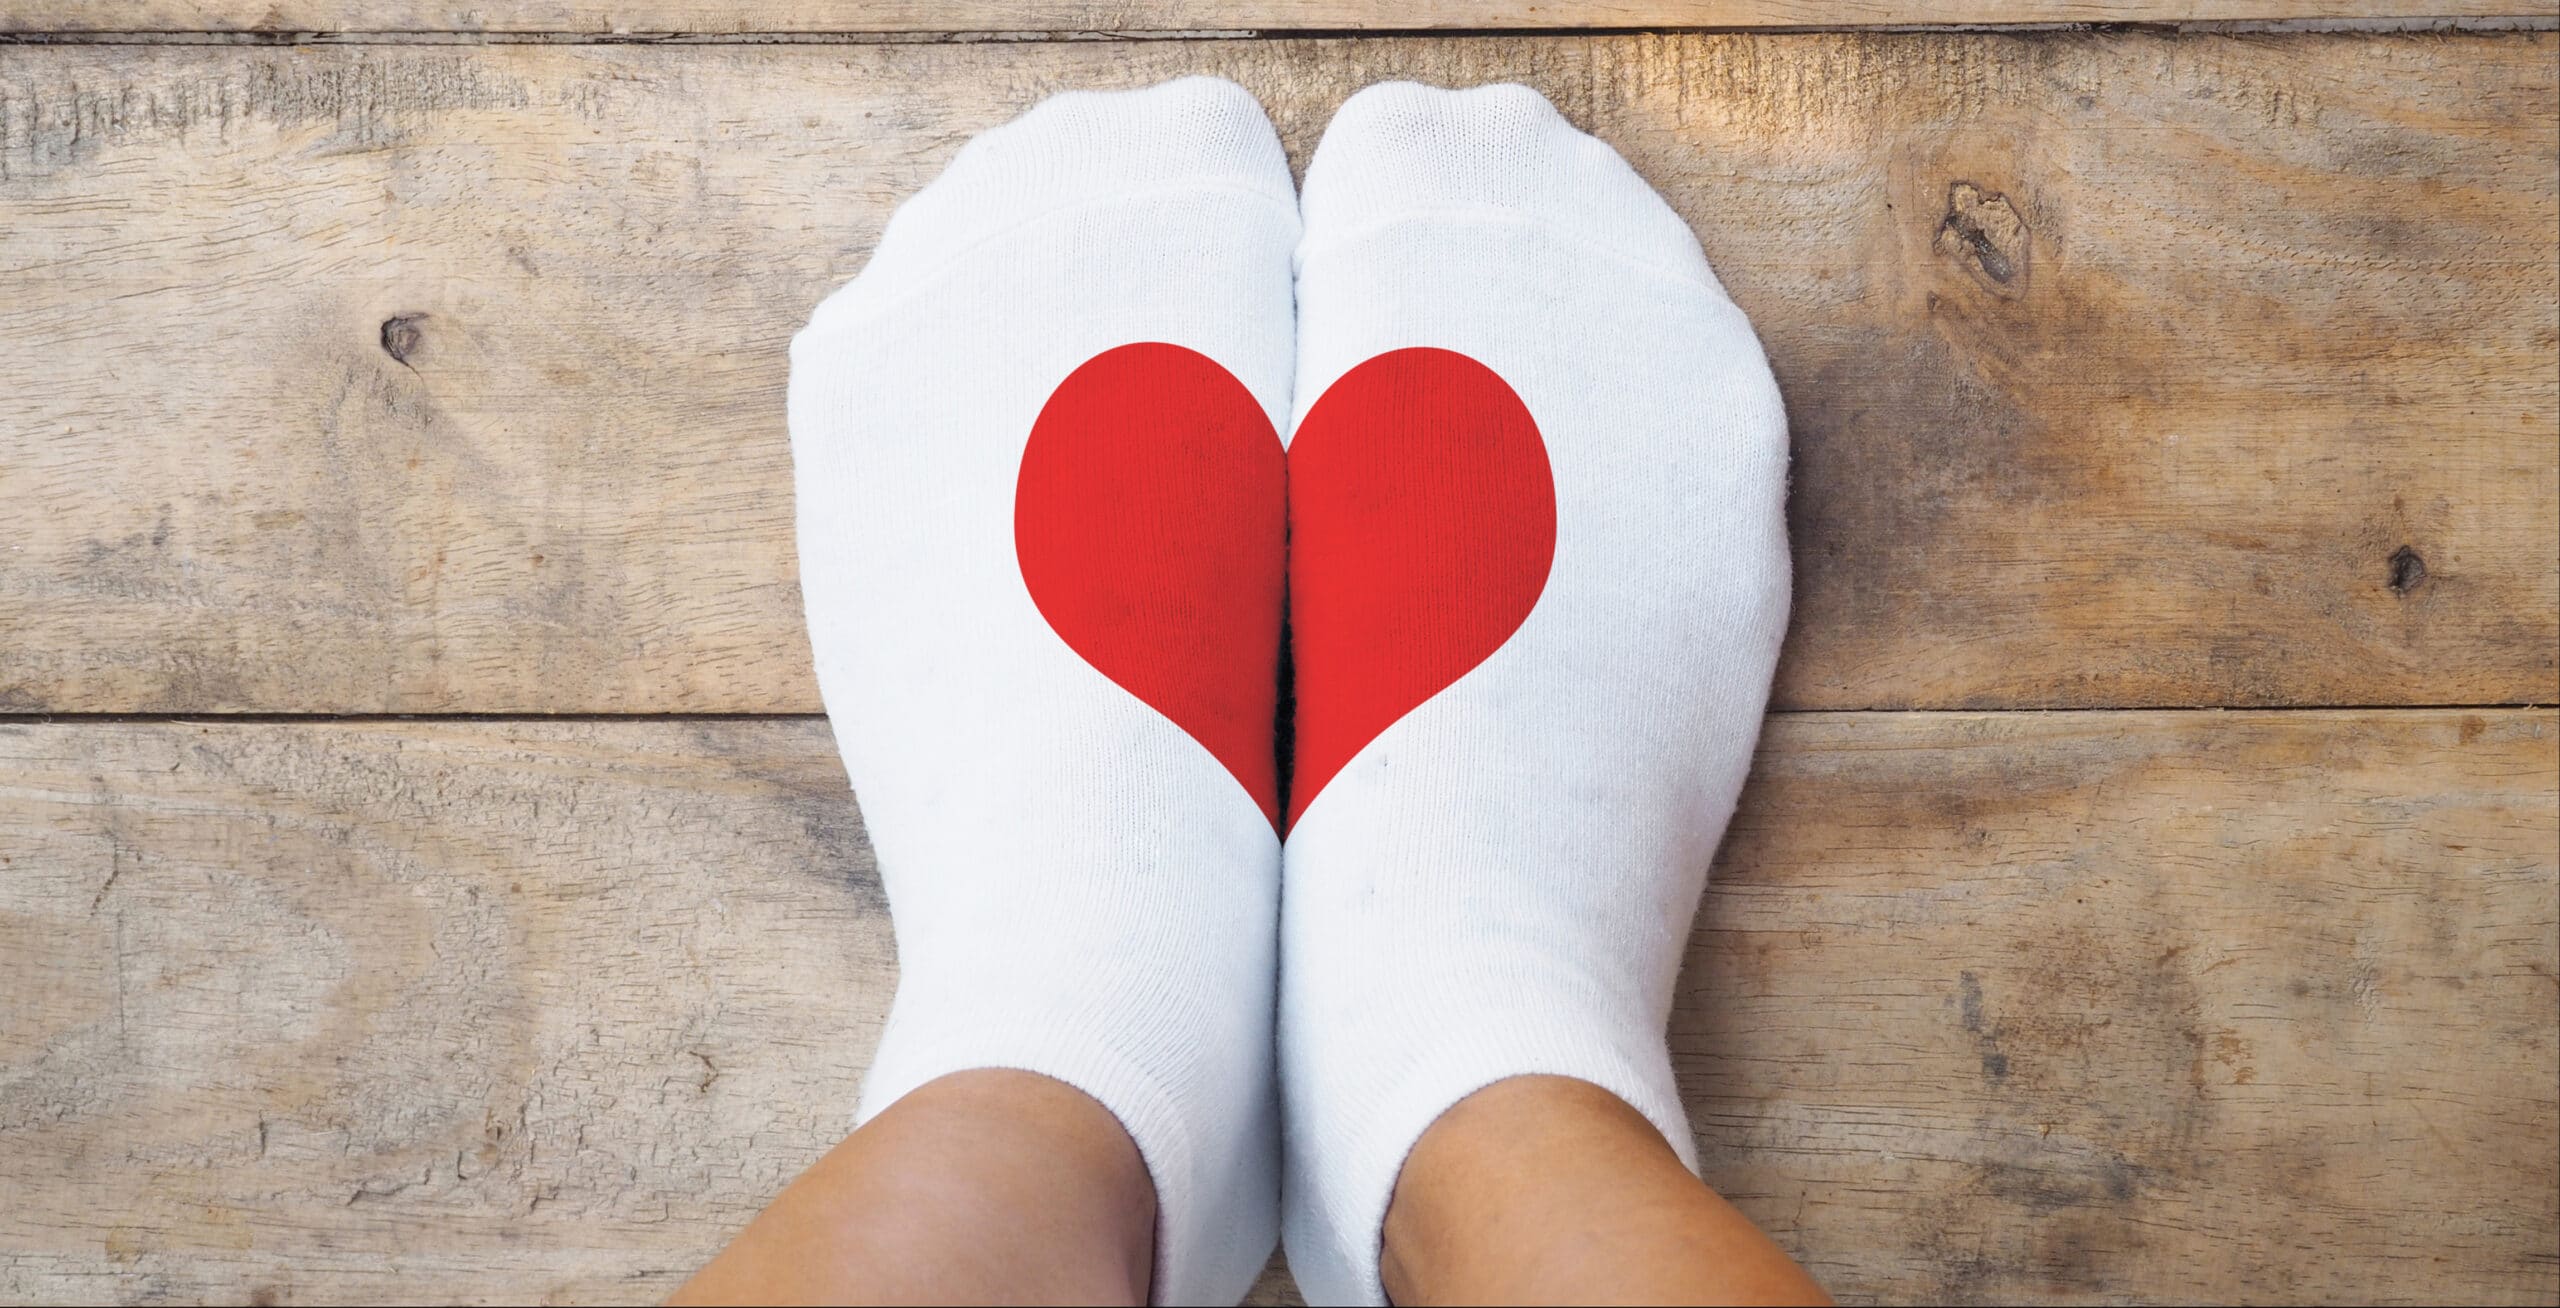 love yourself photo of socks with heart